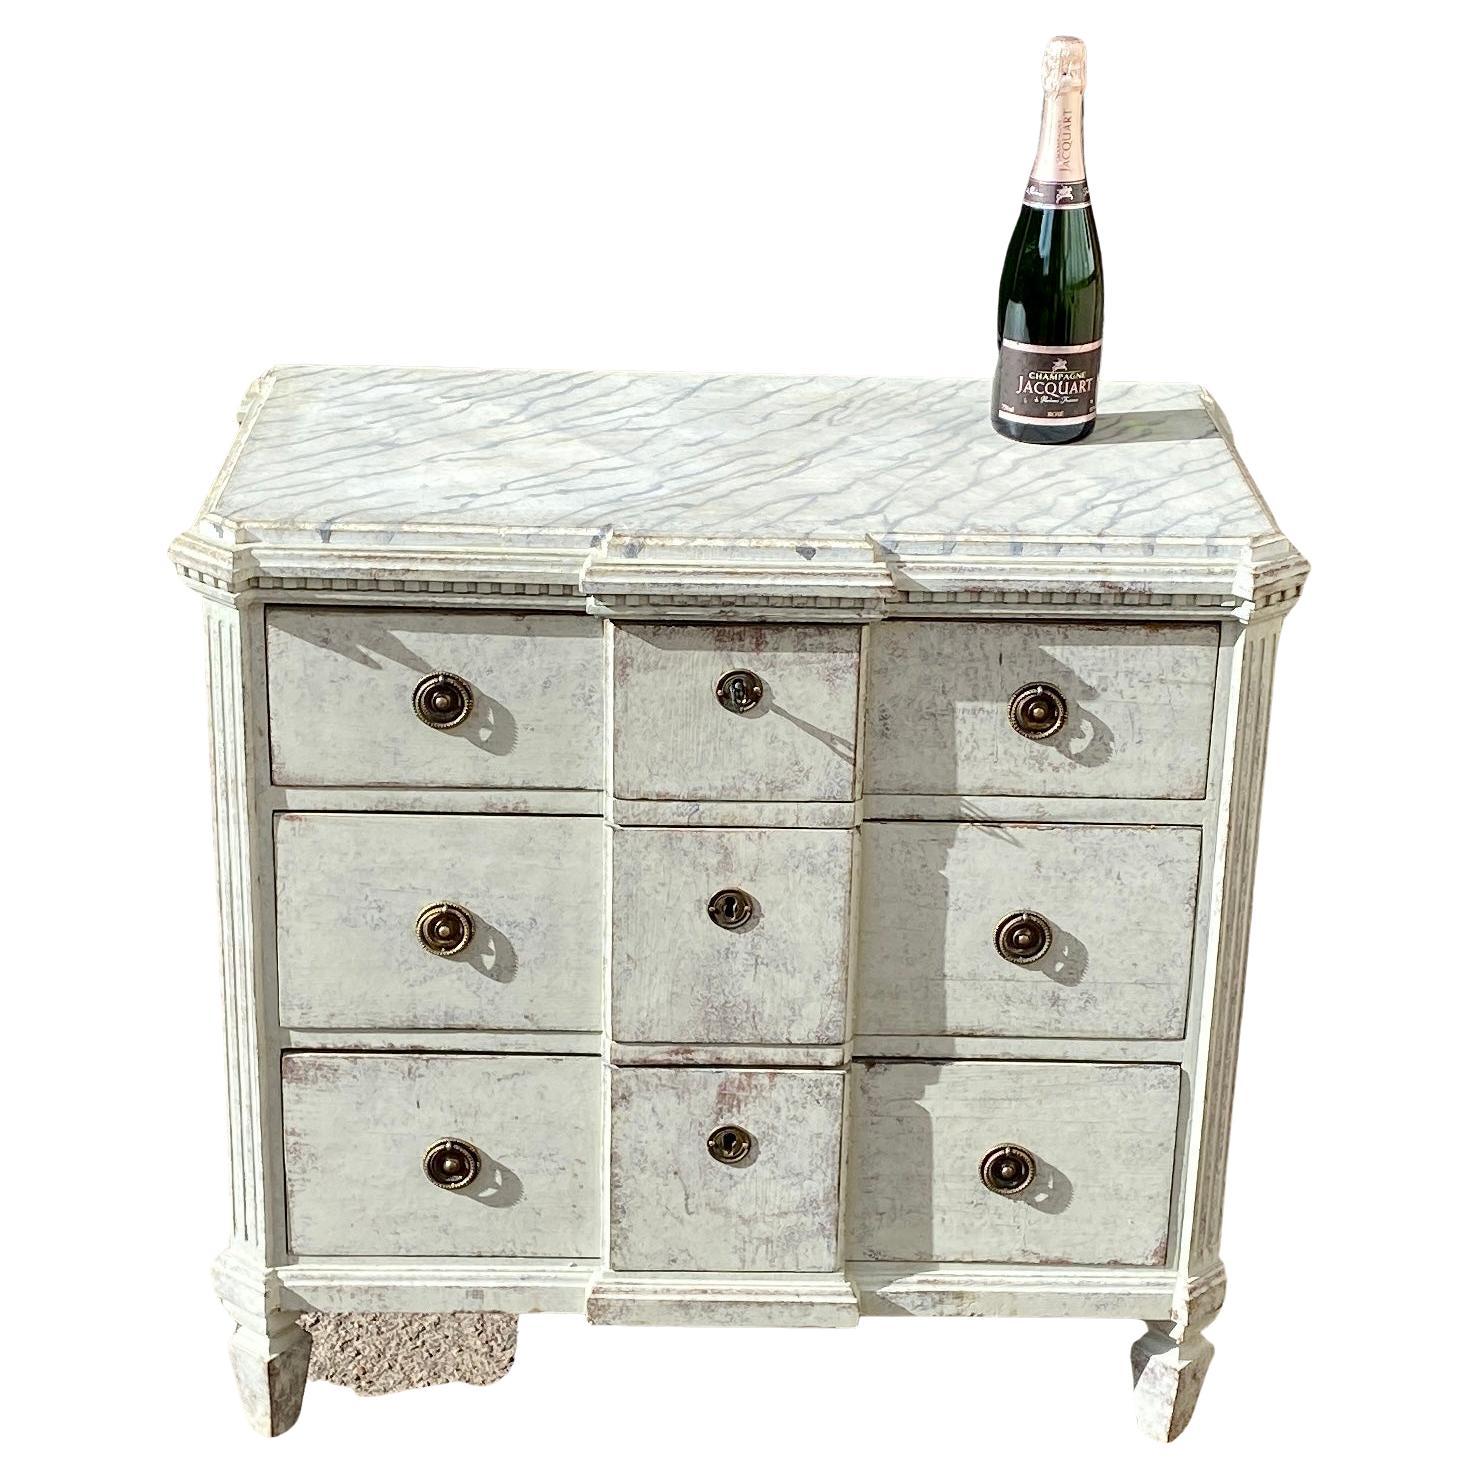 Late 19th century grey painted chest of drawers, Swedish.
This 3 drawer dresser has a charming break front style, an amazing faux marble top and the original brass hardware.